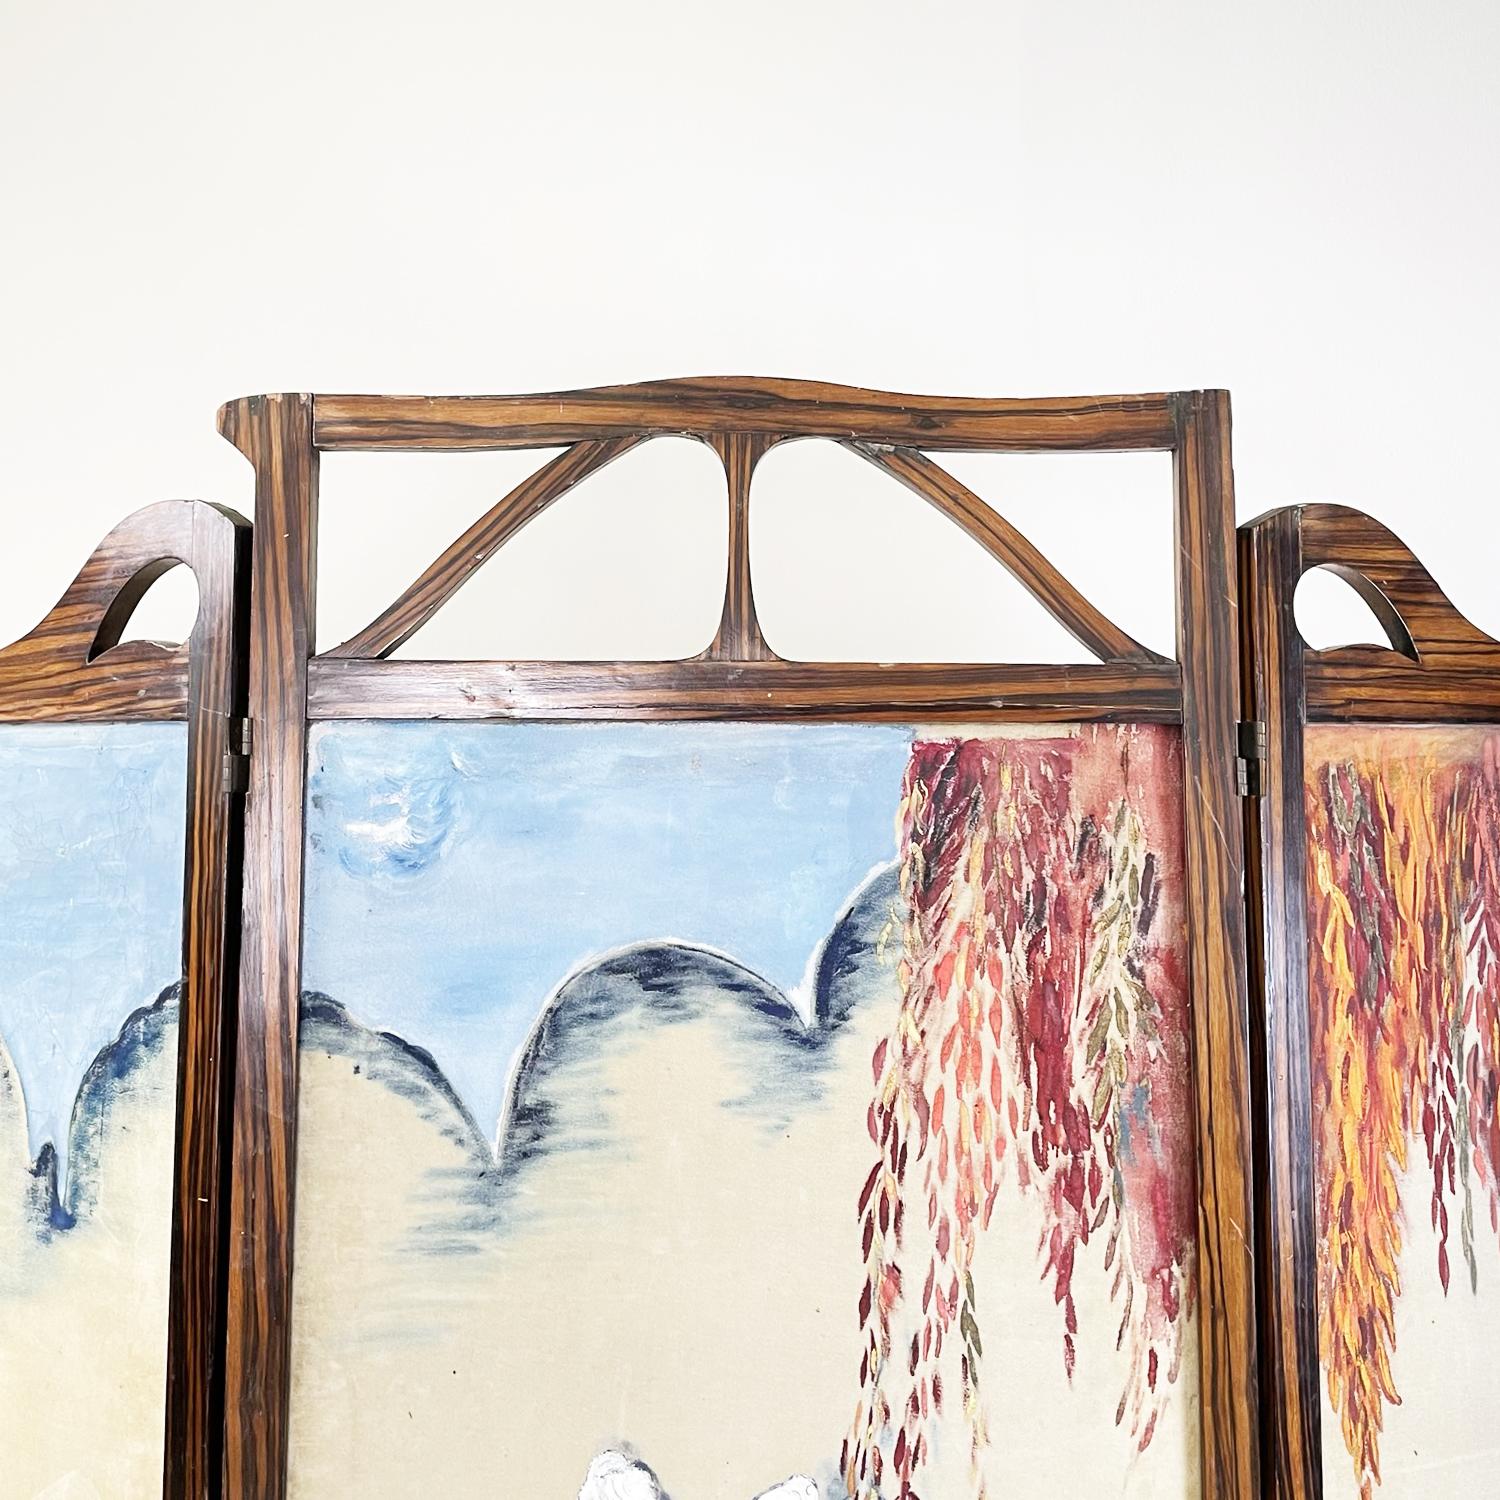 Italian Antique Three-Door Screen Hand Painted on Fabric and Wood, Early 1900s For Sale 4